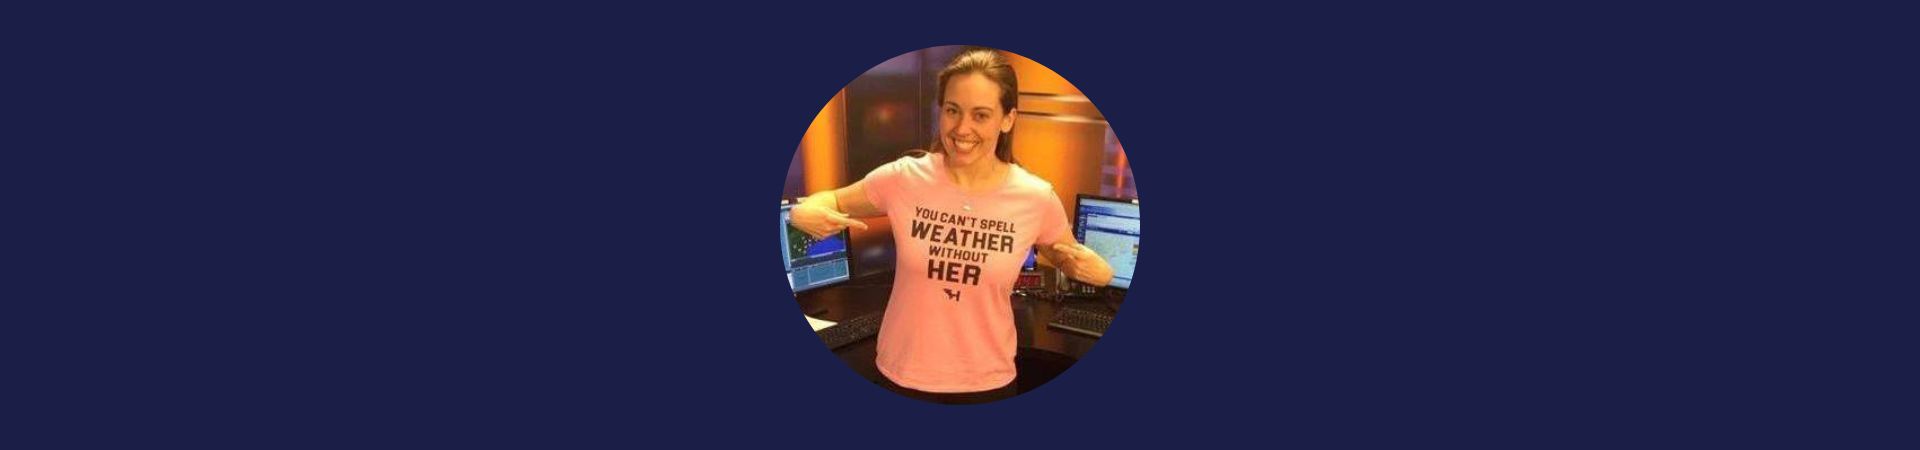  Jessica Conley pointing to her weather shirt 